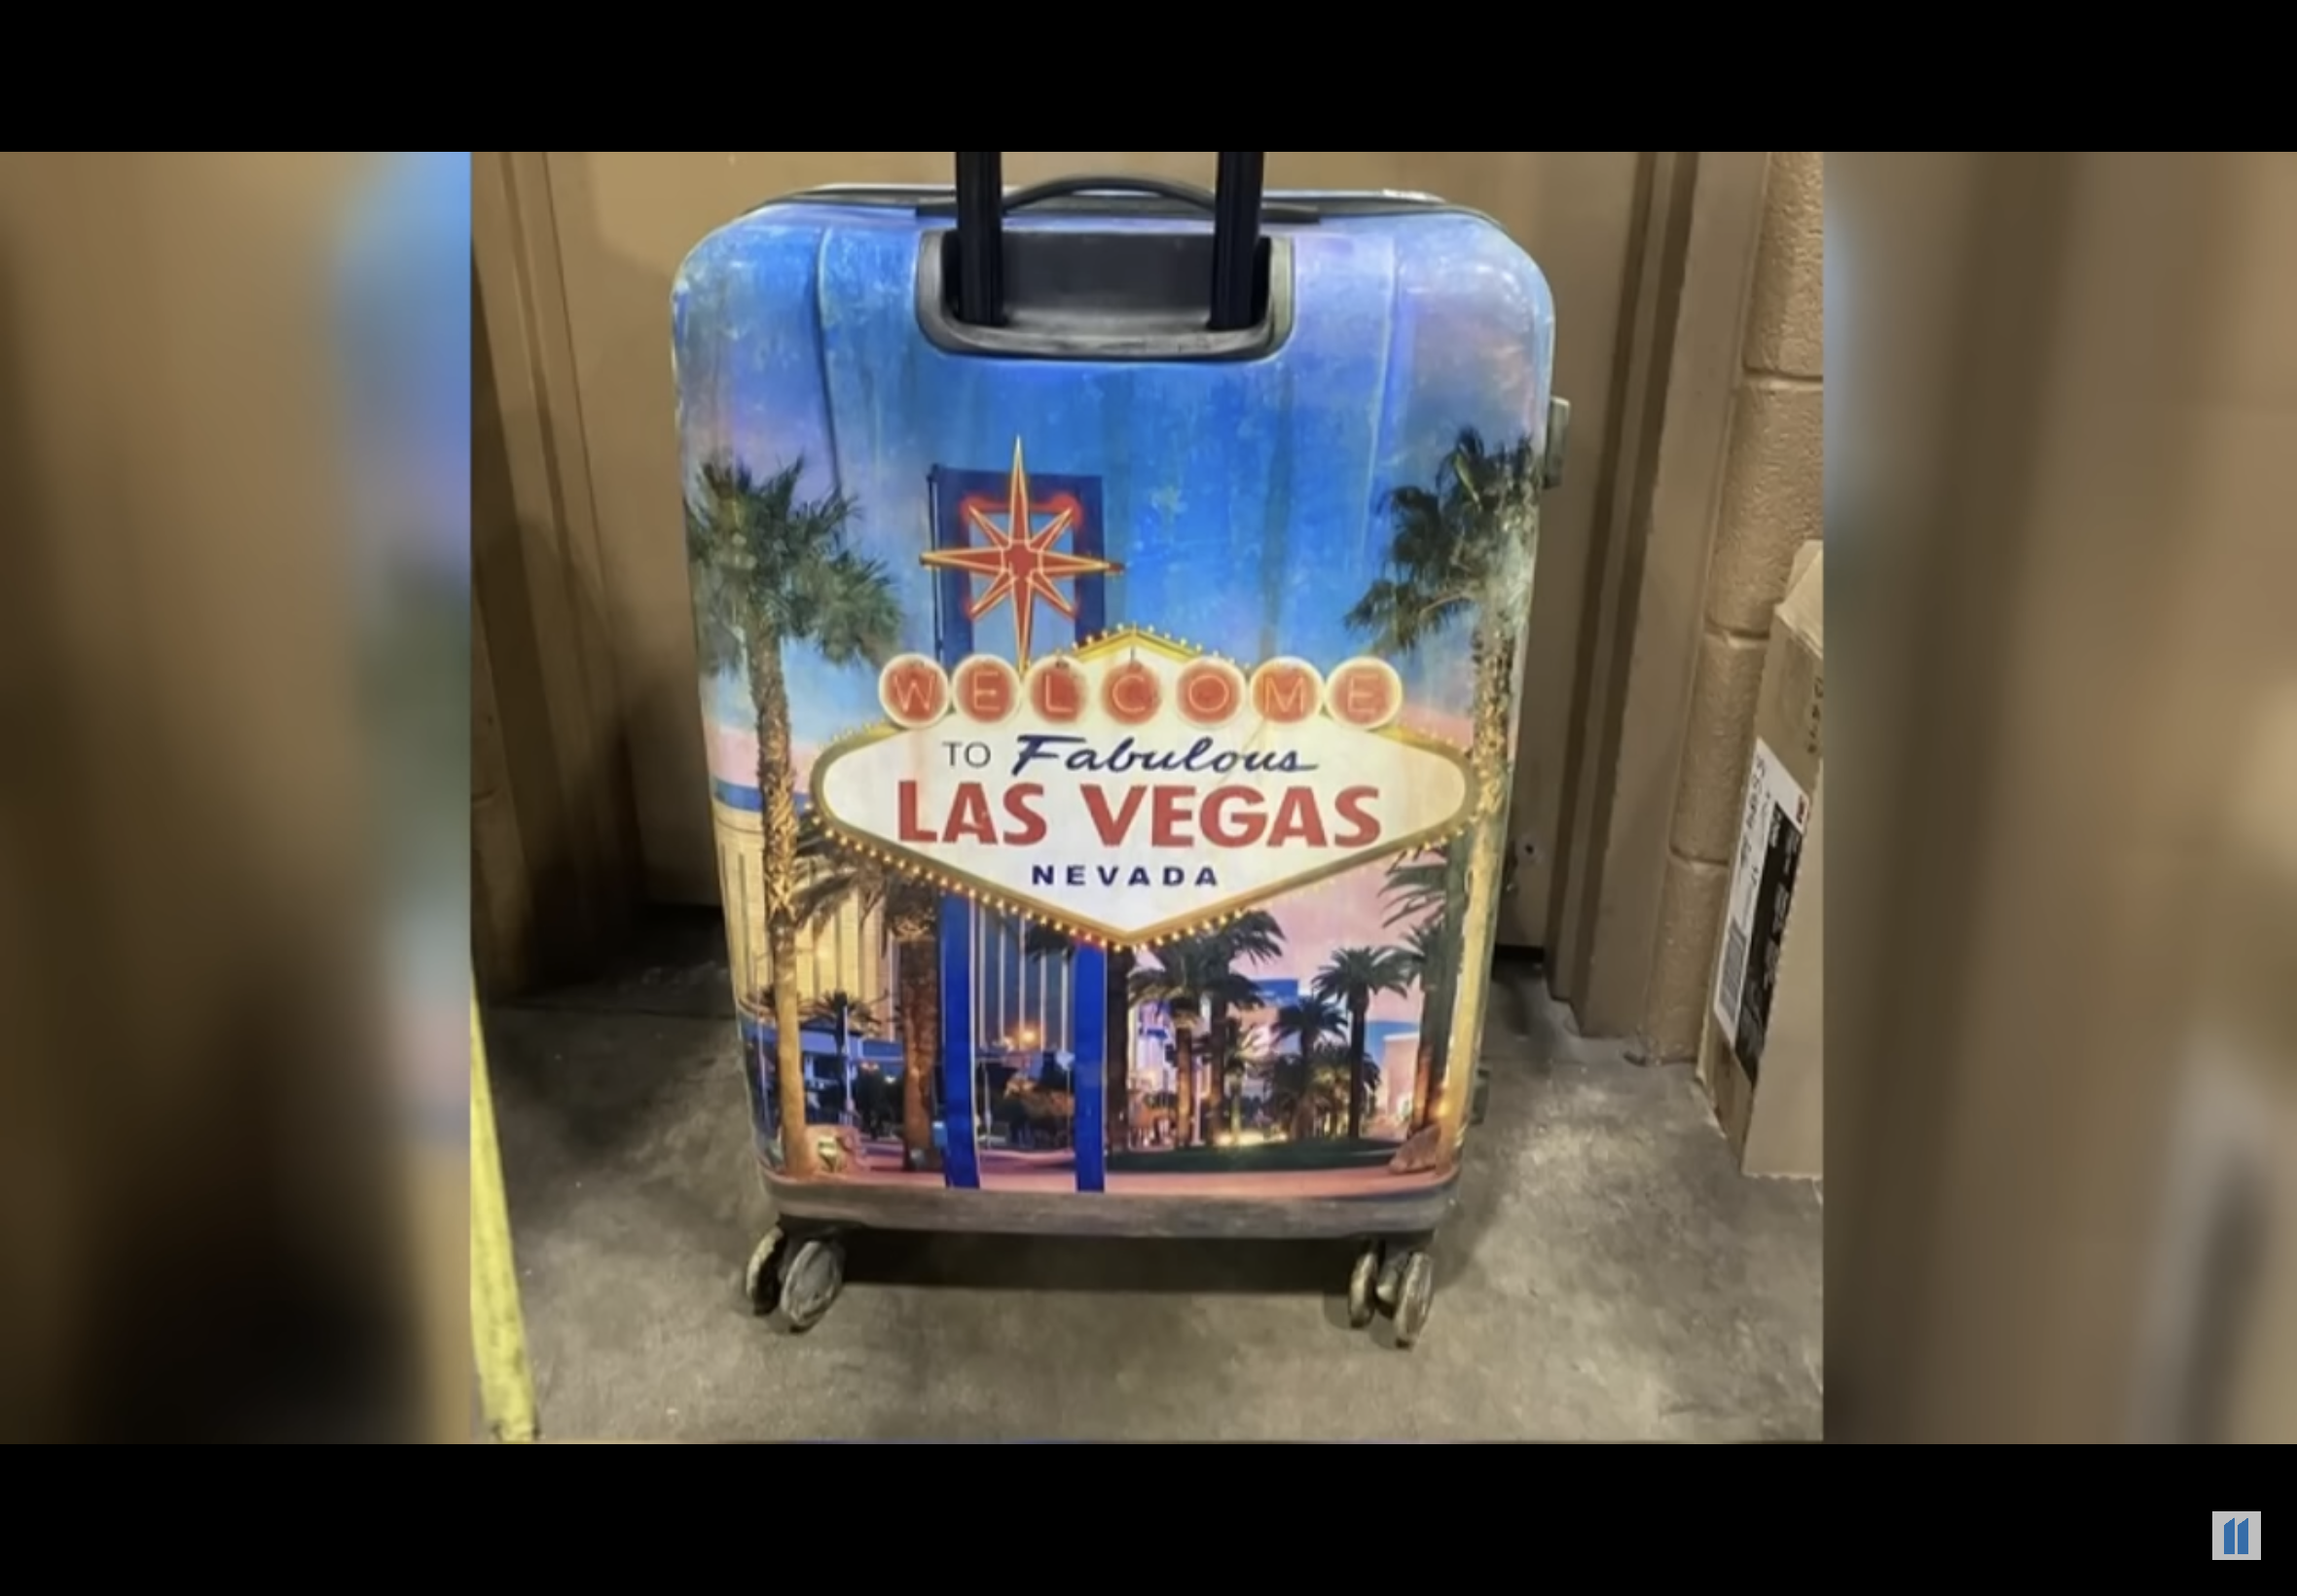 5 Yr Old Boy Found Dead in Suitcase, Warrant Issued For His Mother [VIDEO]